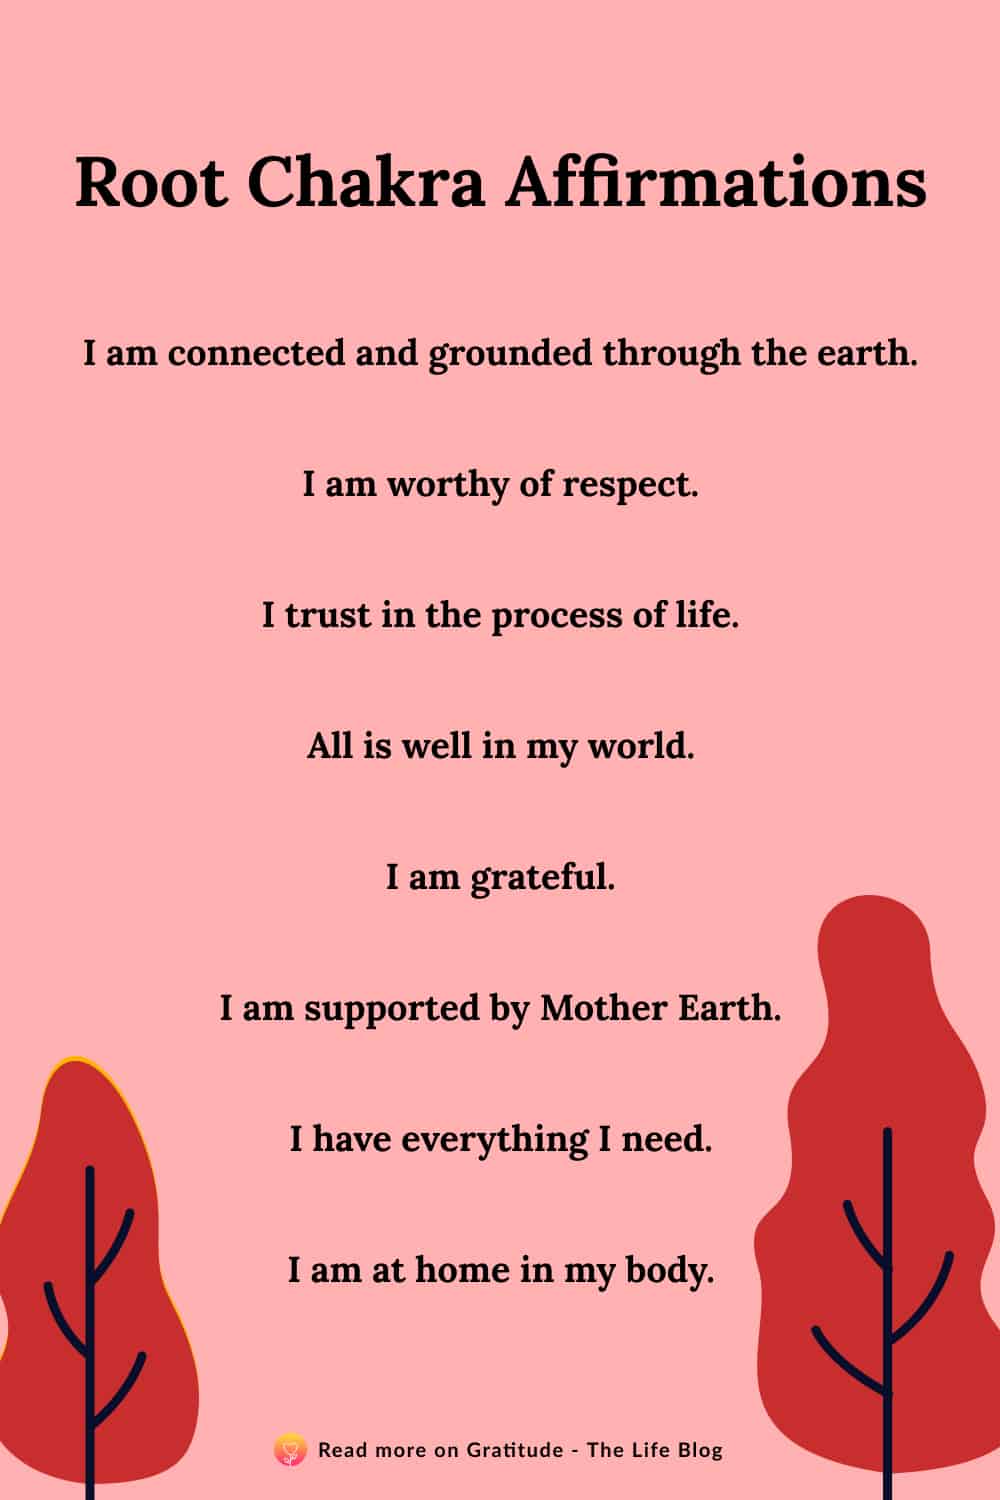 Image showing list of root chakra affirmations